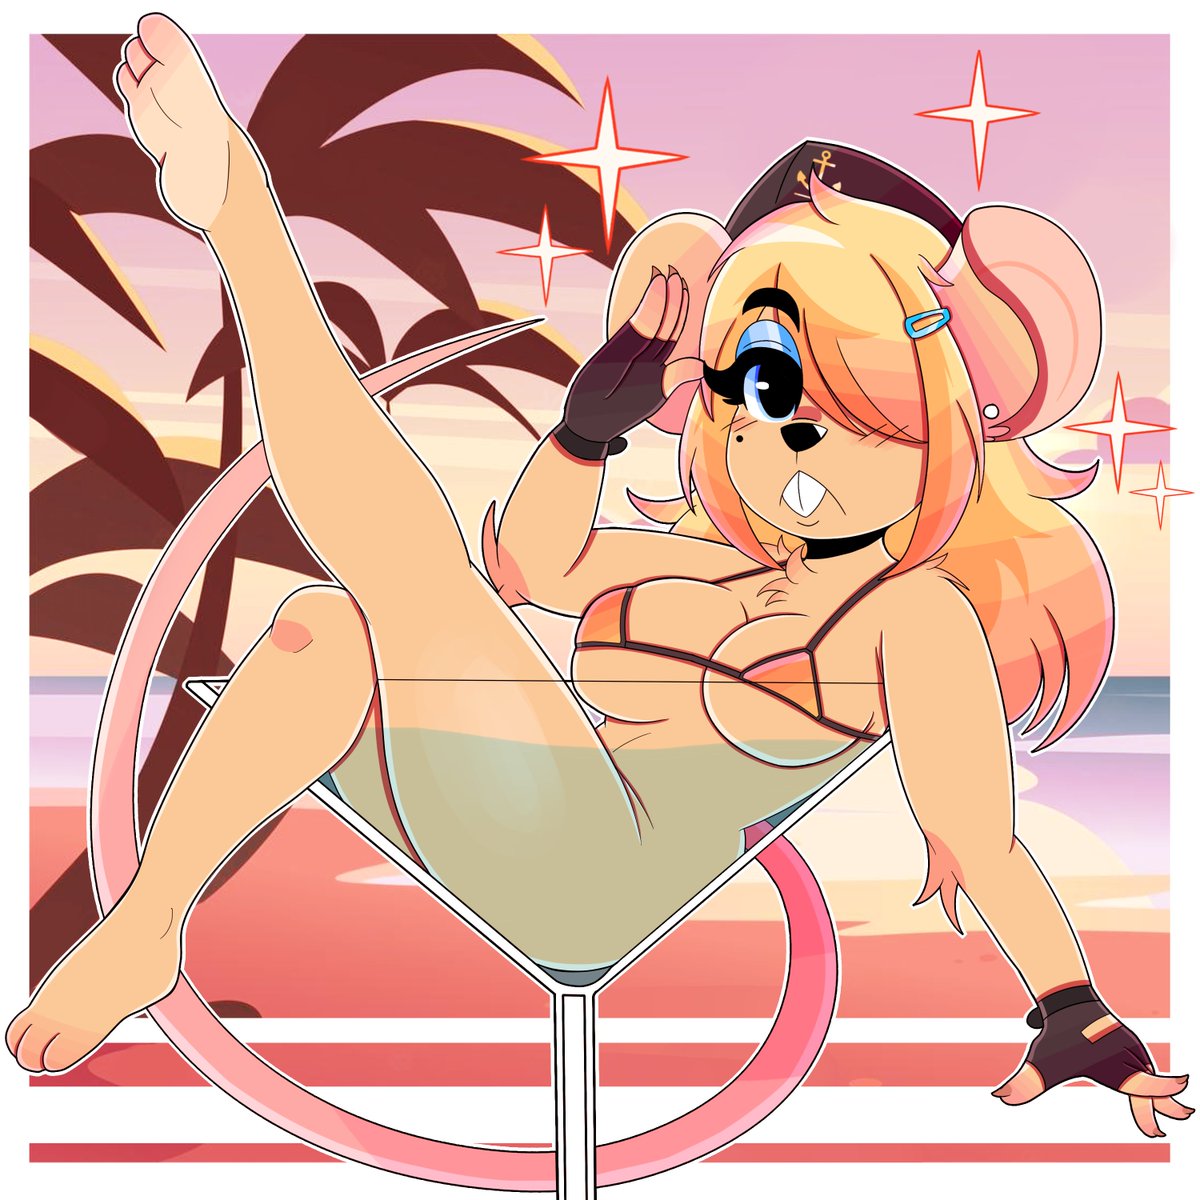 Have a mousetini~ 🐭🍸✨